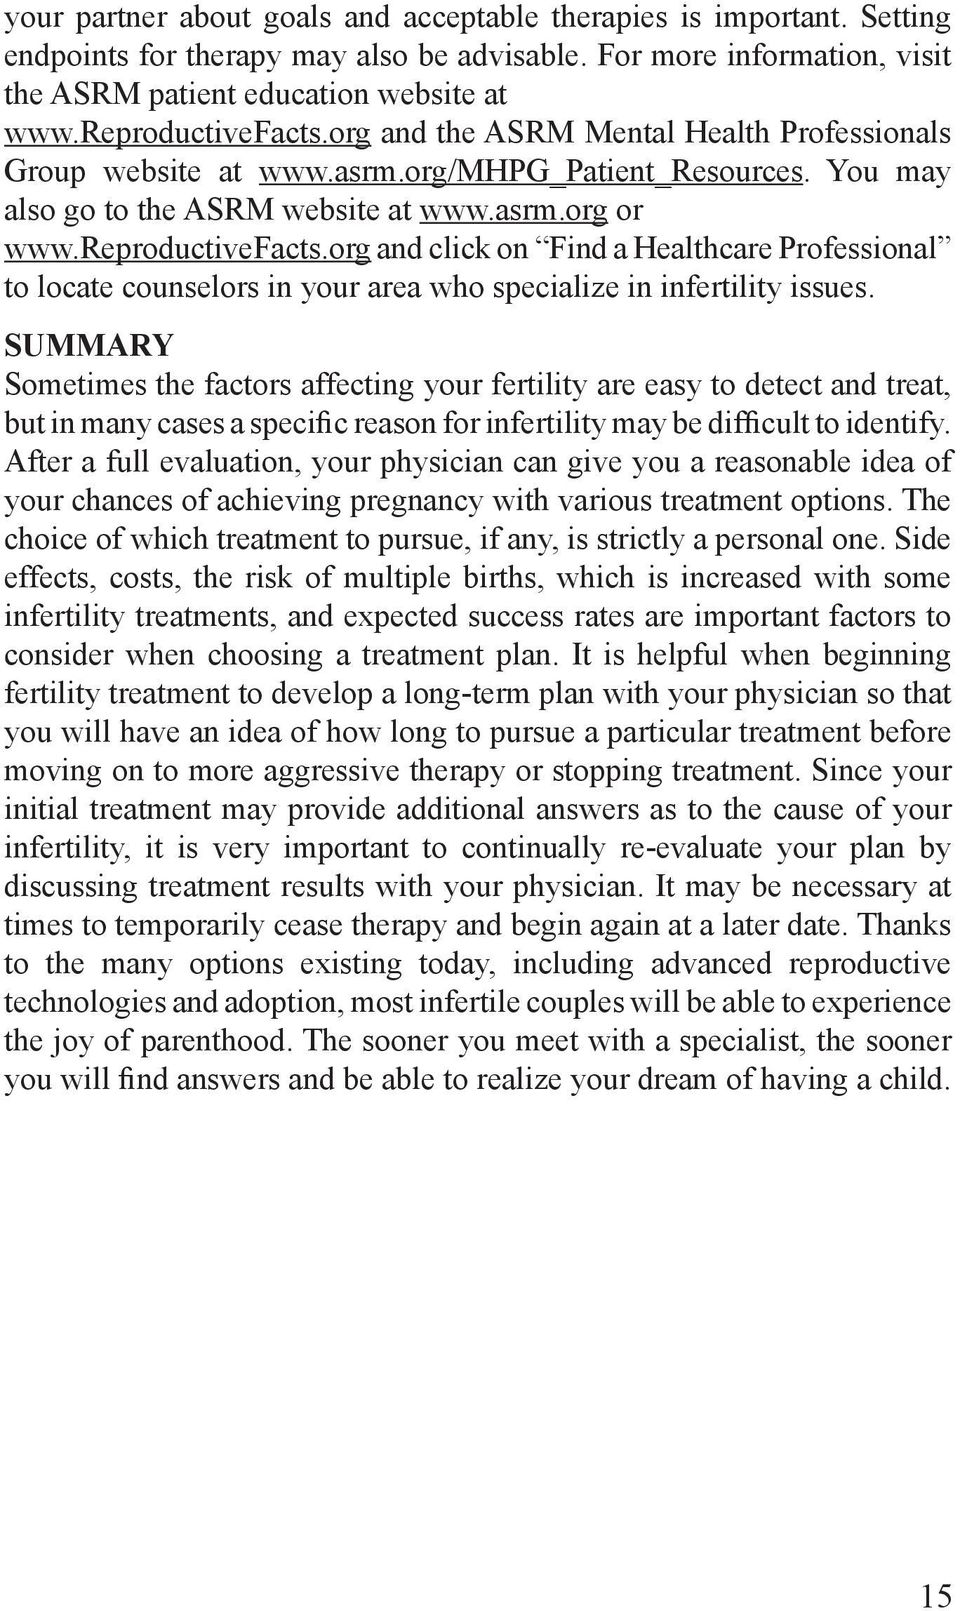 SUMMARY Sometimes the factors affecting your fertility are easy to detect and treat, but in many cases a specific reason for infertility may be difficult to identify.